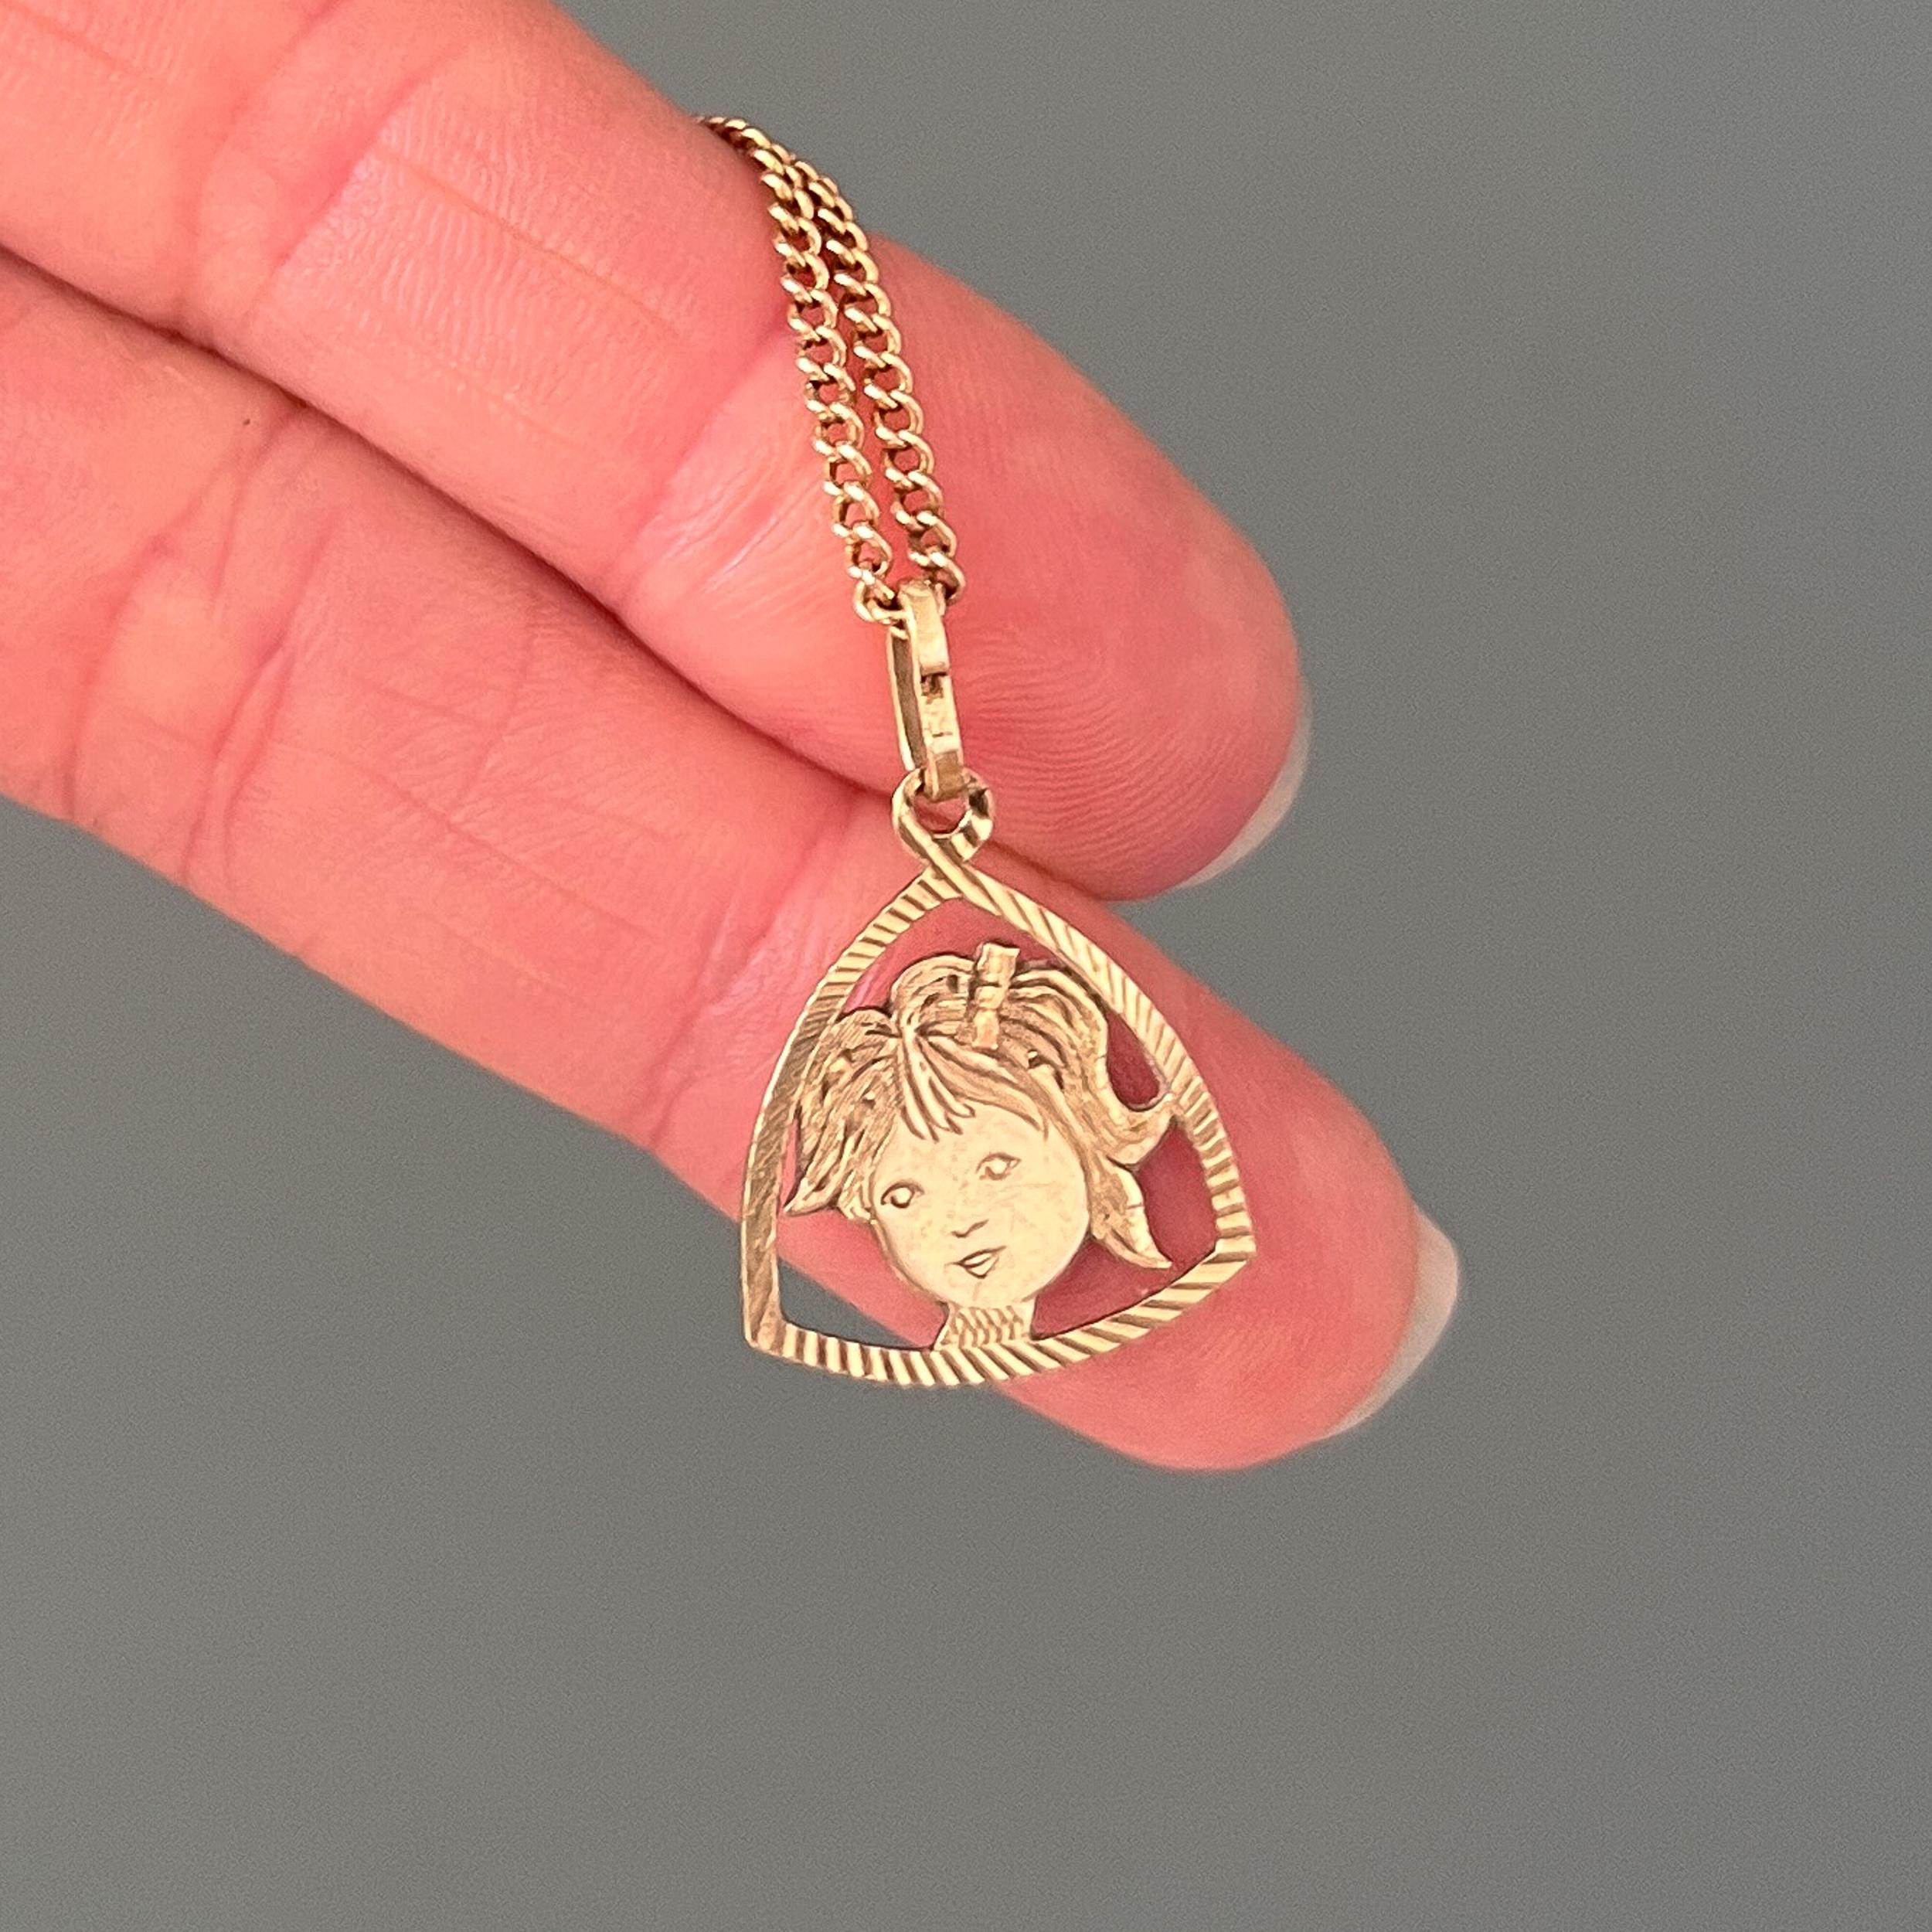 Vintage Little Girl with Bow 14K Gold Charm Pendant In Good Condition For Sale In Rotterdam, NL